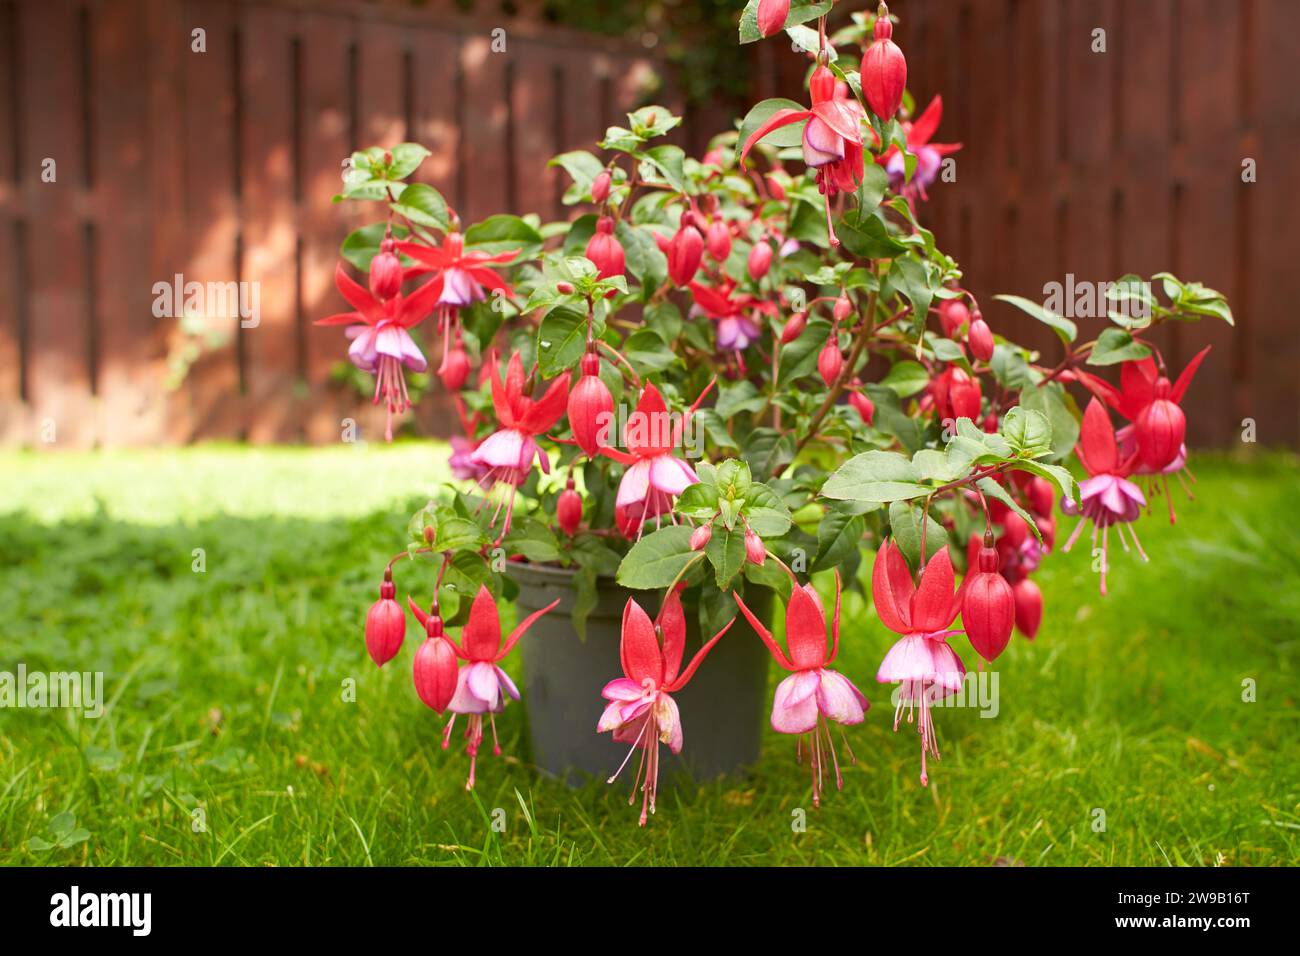 Large pot with lots of blooming Pink and white Fuchsia flowers Stock Photo